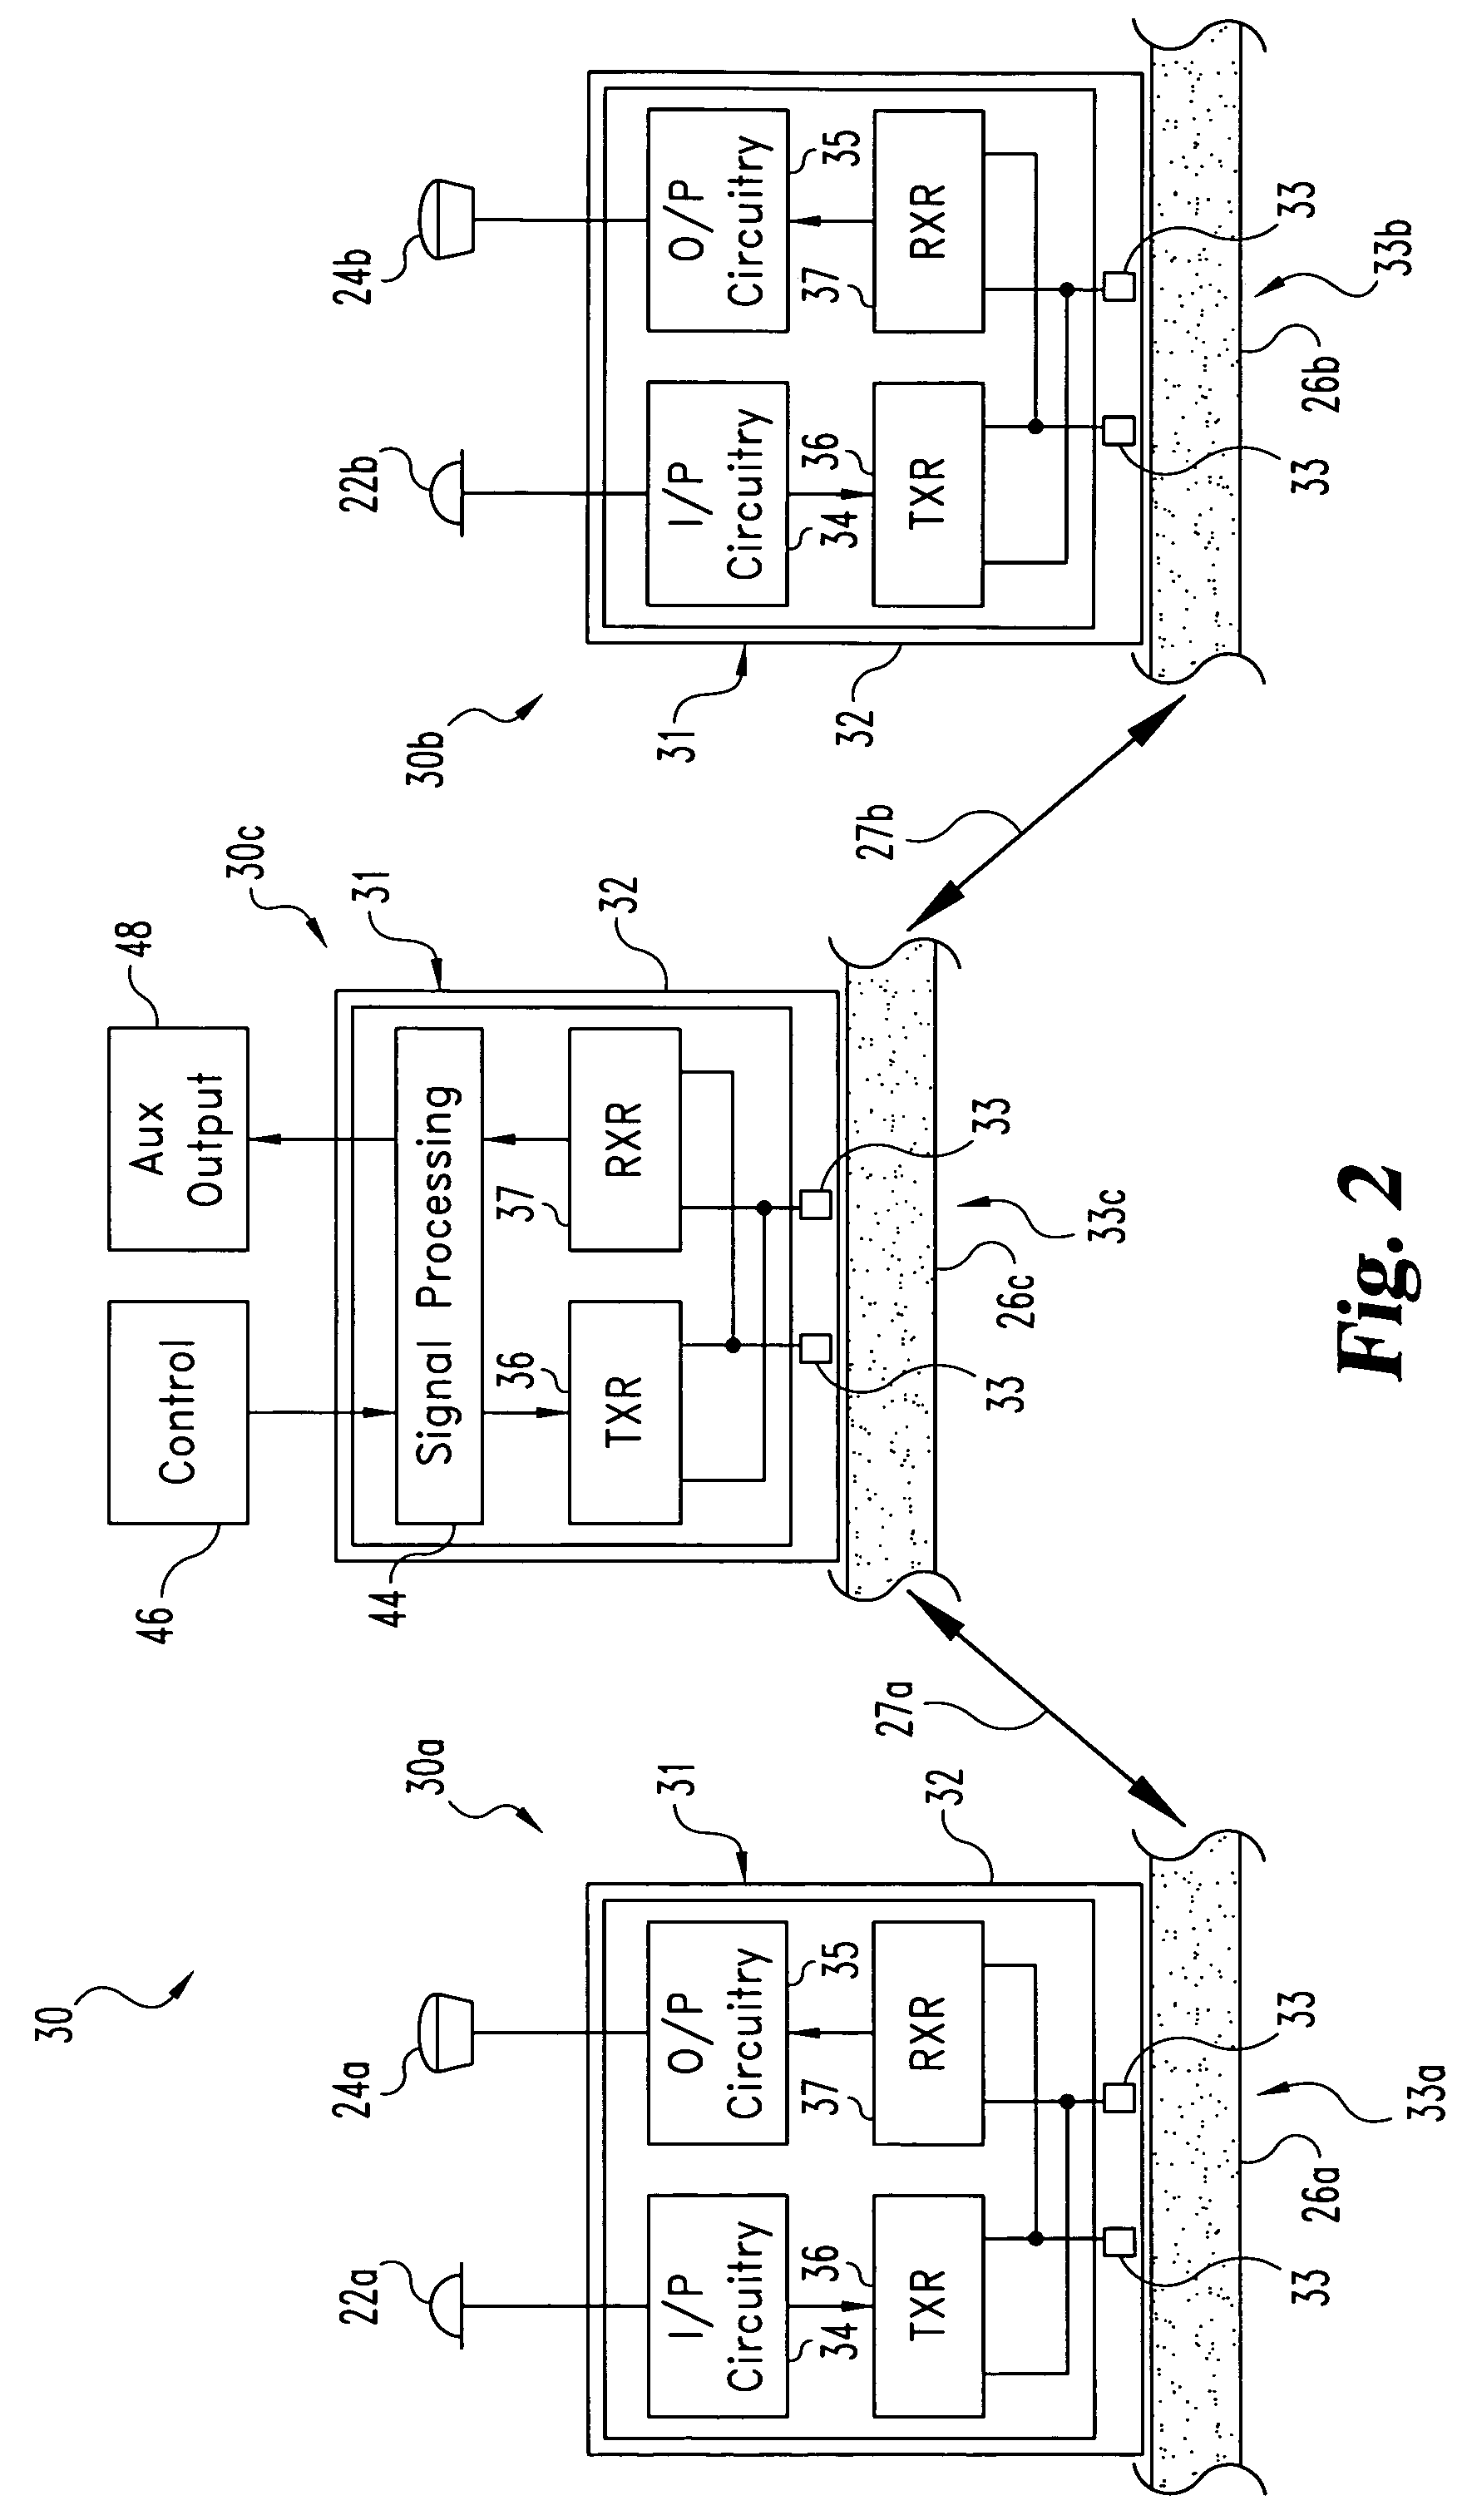 Intrabody communication for a hearing aid